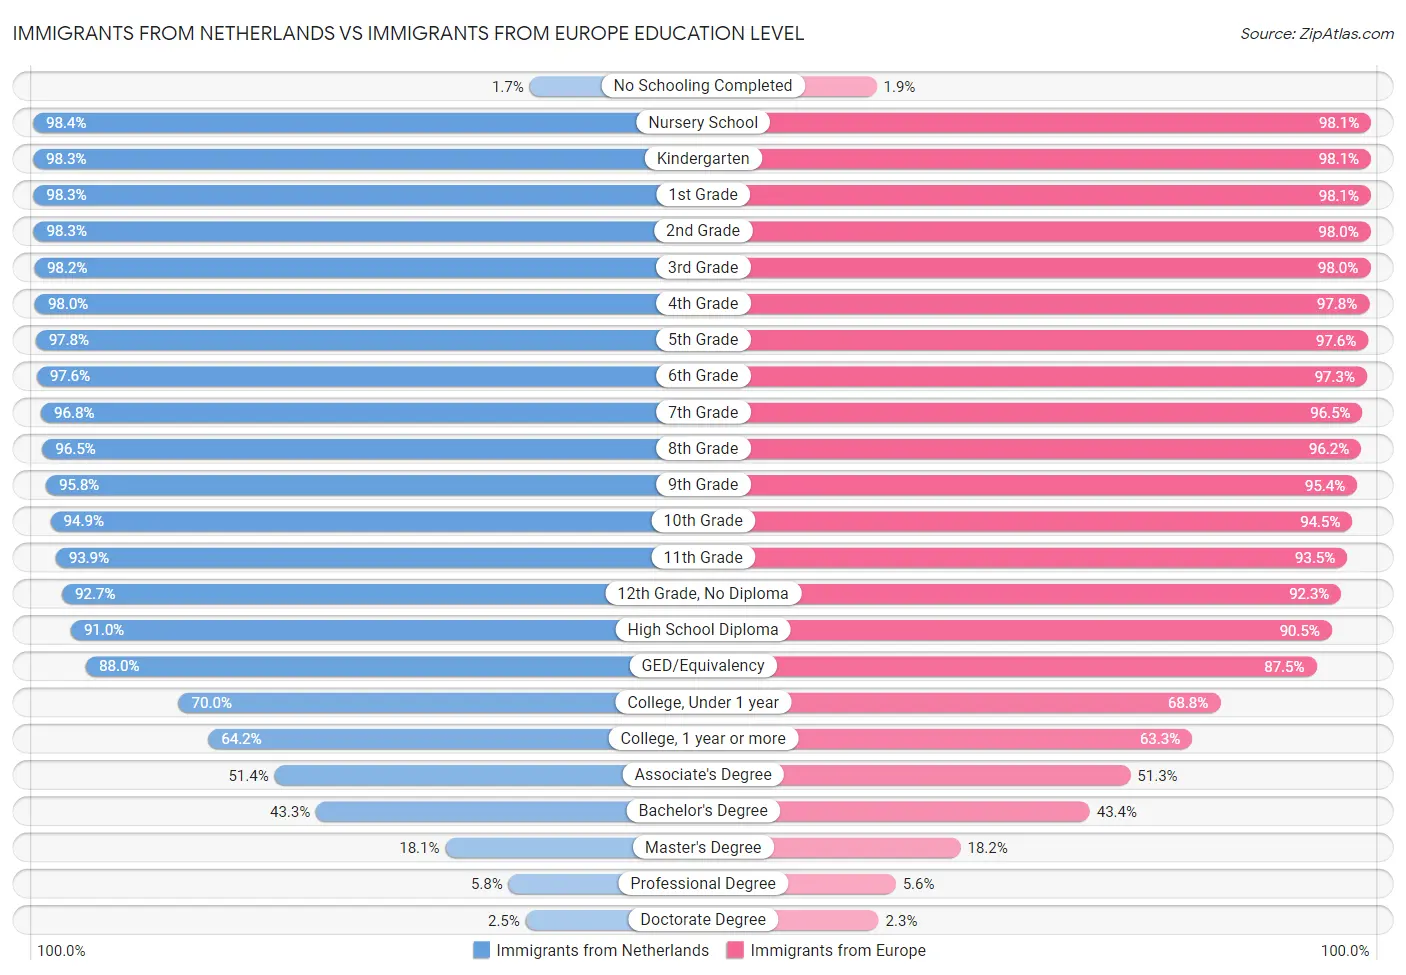 Immigrants from Netherlands vs Immigrants from Europe Education Level